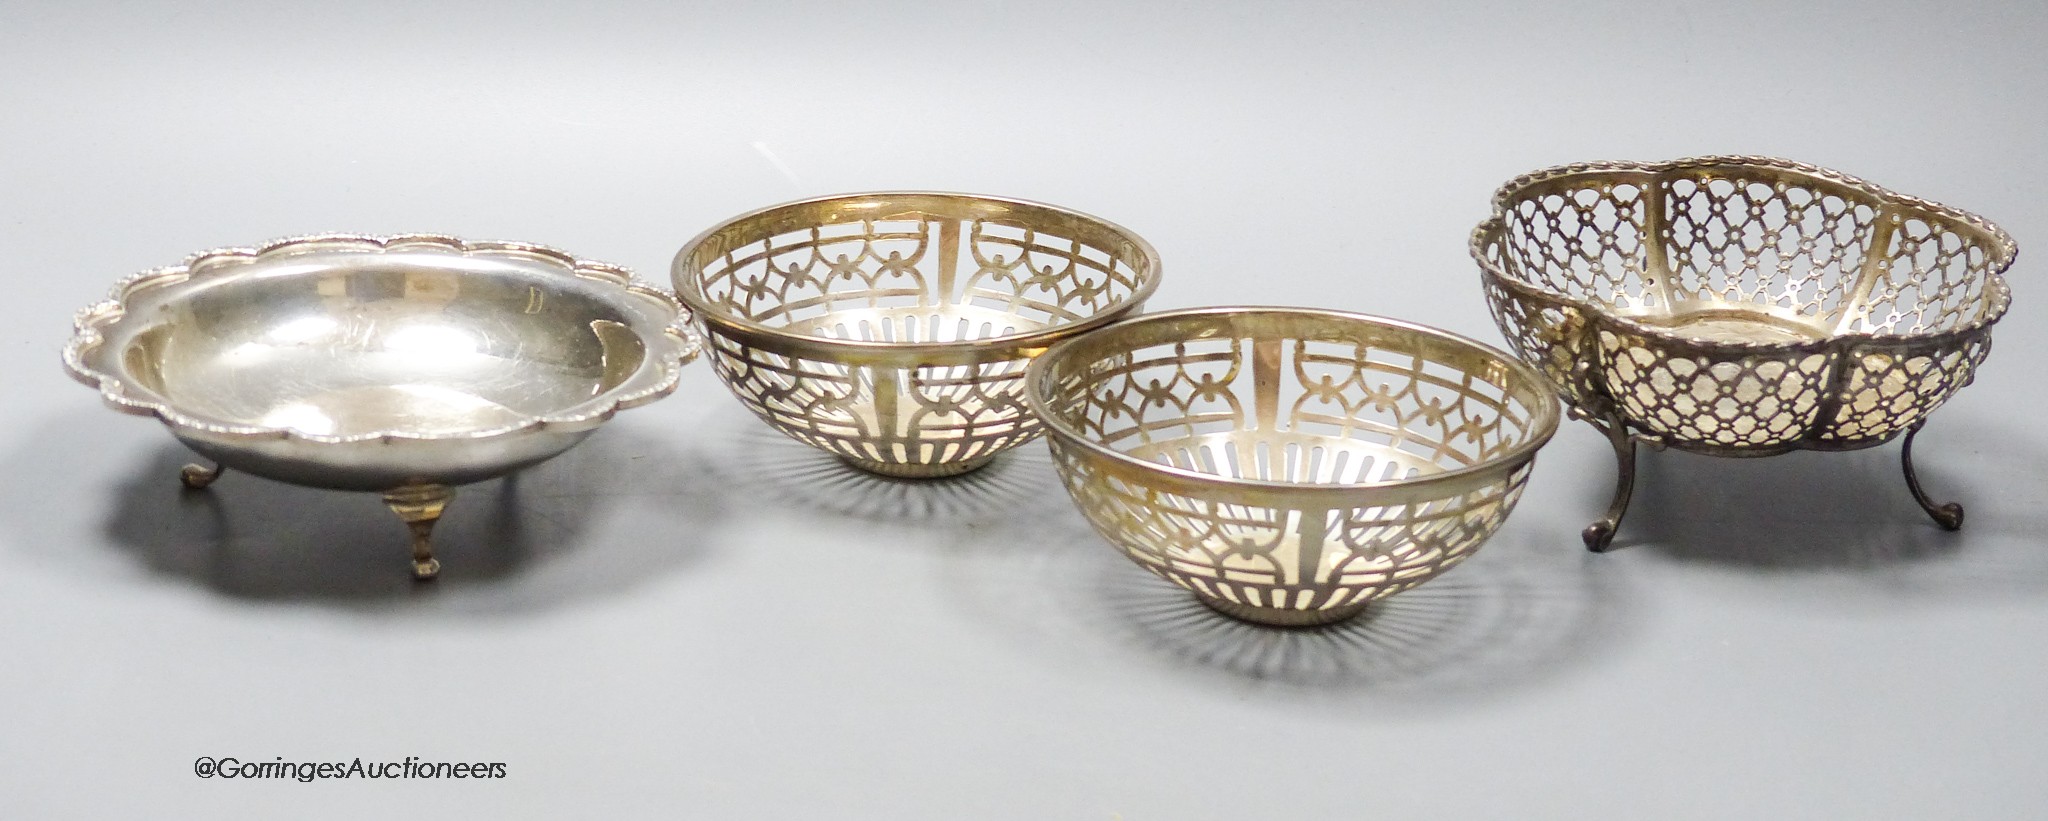 A pair of Edwardian pierced silver circular small bowls, Walker & Hall, Sheffield, 1909, 10.6cm and two other silver bowls, 10oz.